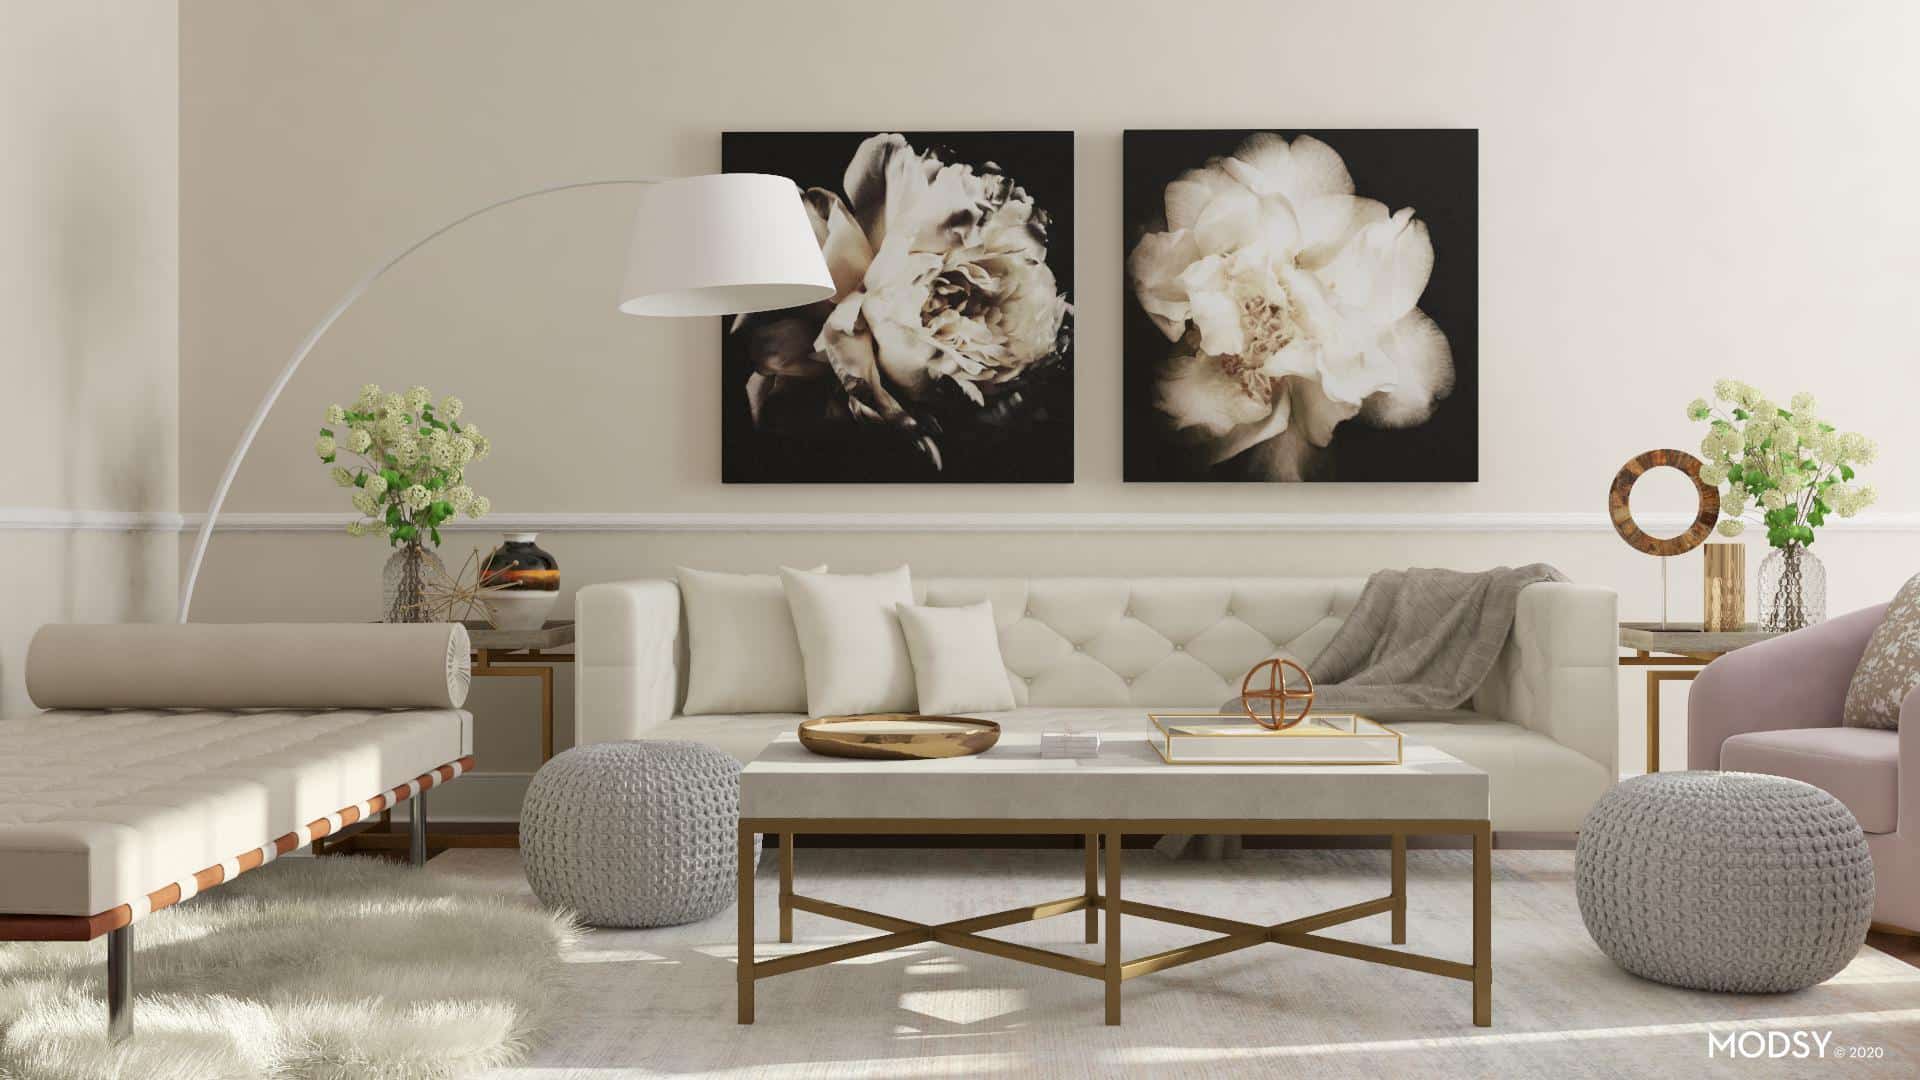 15 Stylish Decor Ideas for Your Glam Living Room